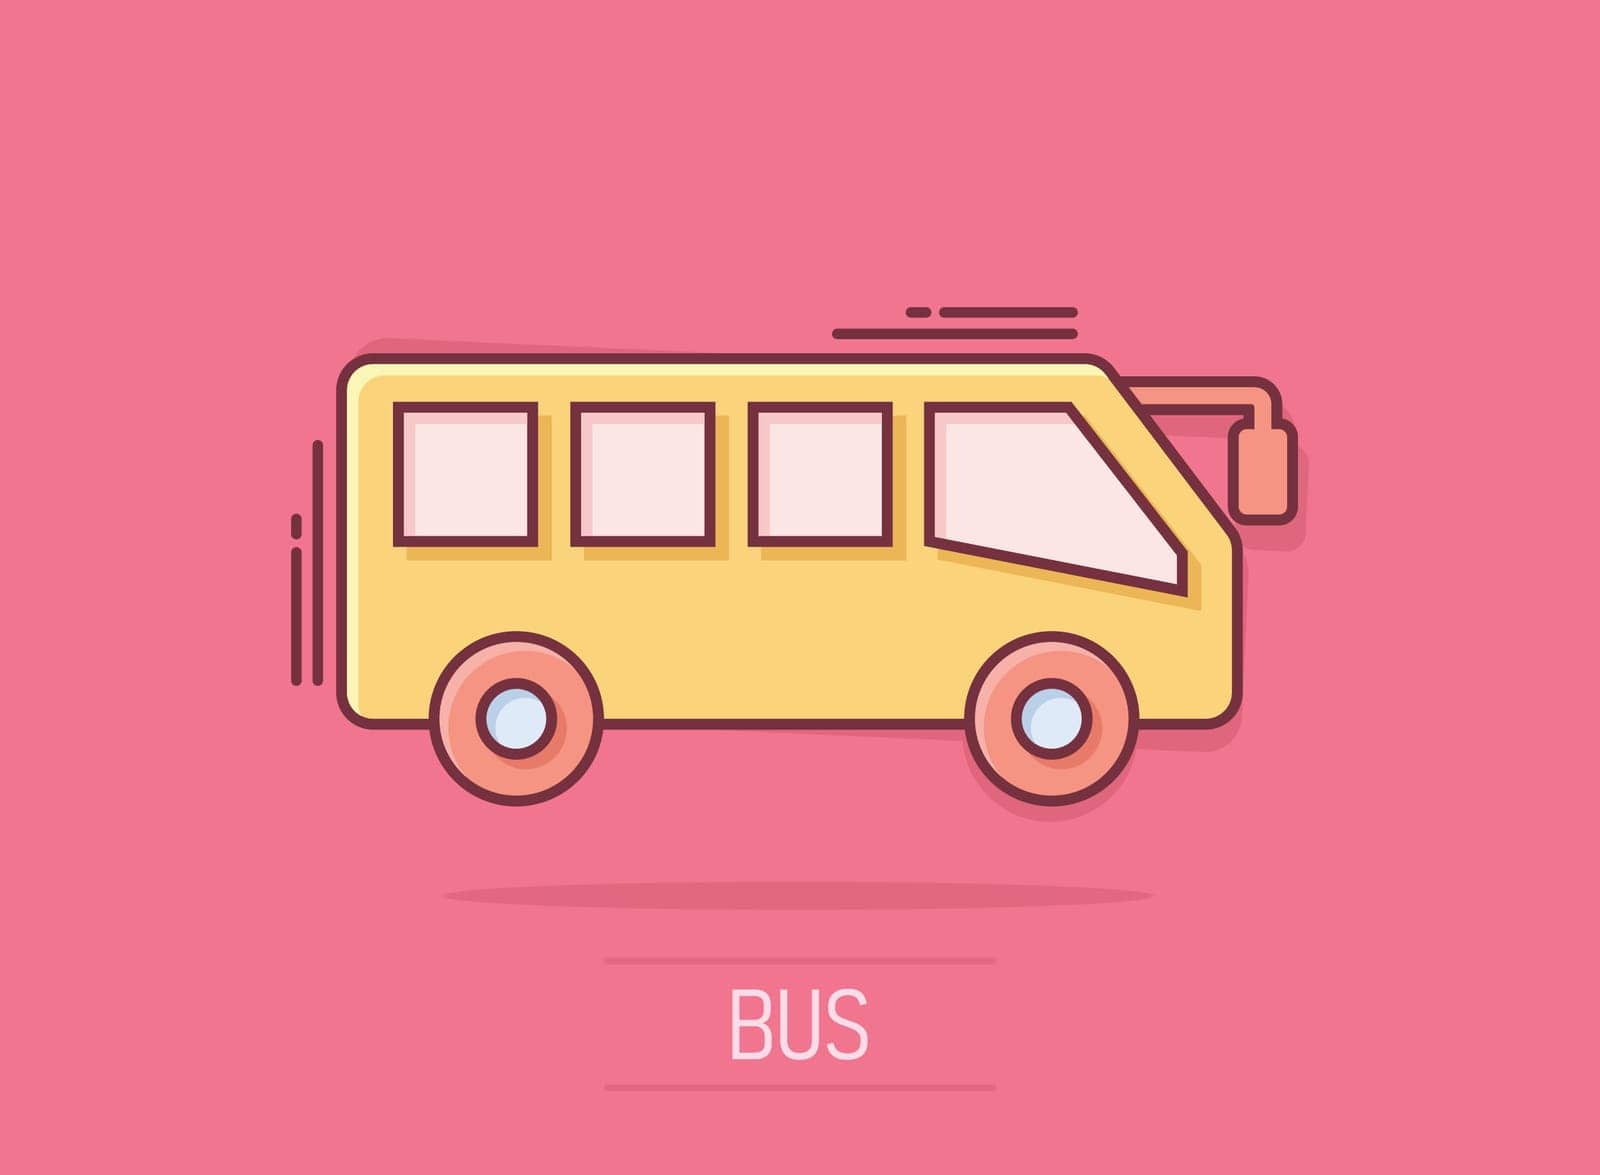 Bus icon in comic style. Coach cartoon vector illustration on isolated background. Autobus vehicle splash effect business concept. by LysenkoA